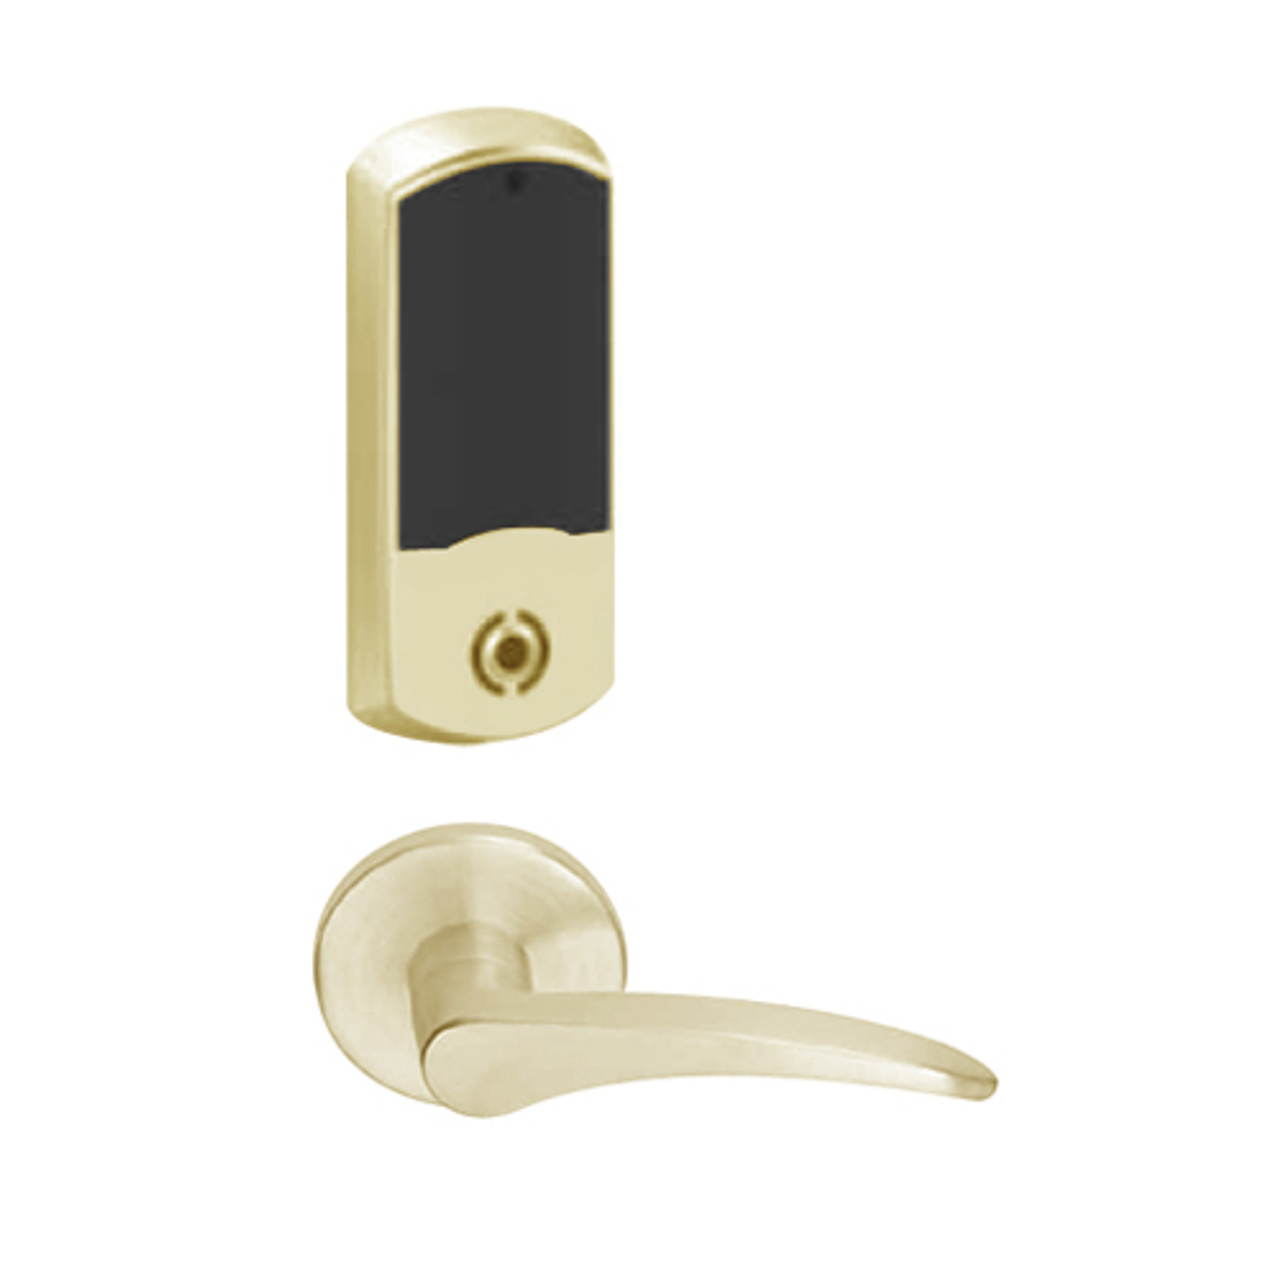 LEMS-GRW-J-12-606-00B-LH Schlage Storeroom Wireless Greenwich Mortise Lock with LED Indicator and 12 Lever Prepped for FSIC in Satin Brass